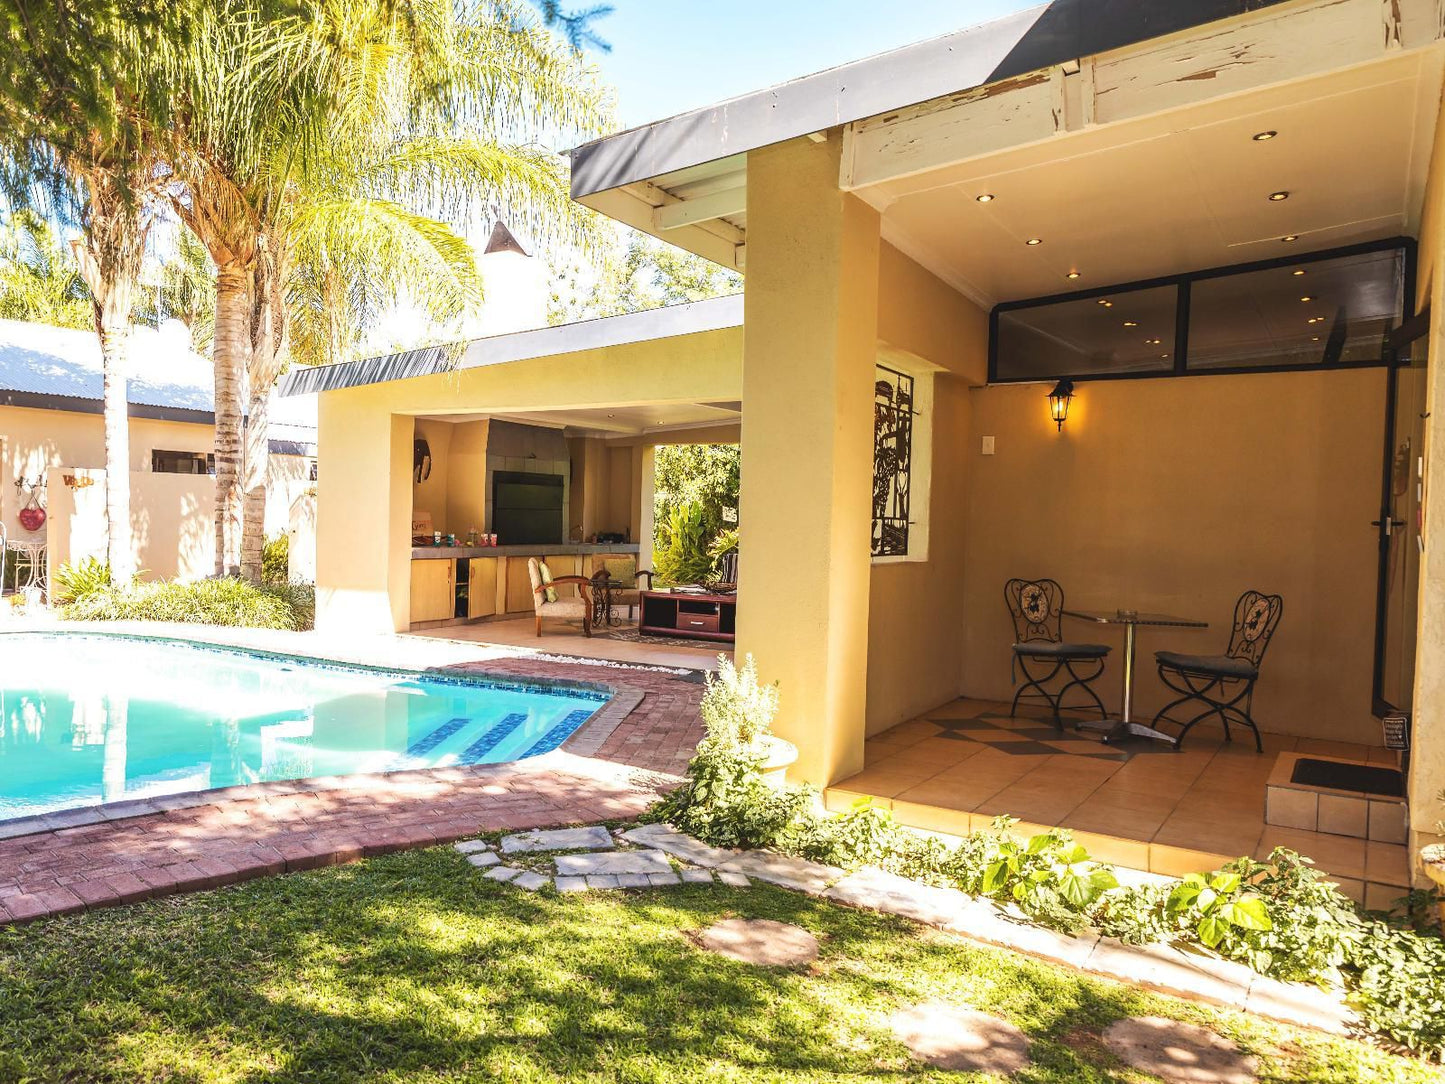 Be My Guest Guesthouse Upington Northern Cape South Africa House, Building, Architecture, Palm Tree, Plant, Nature, Wood, Swimming Pool